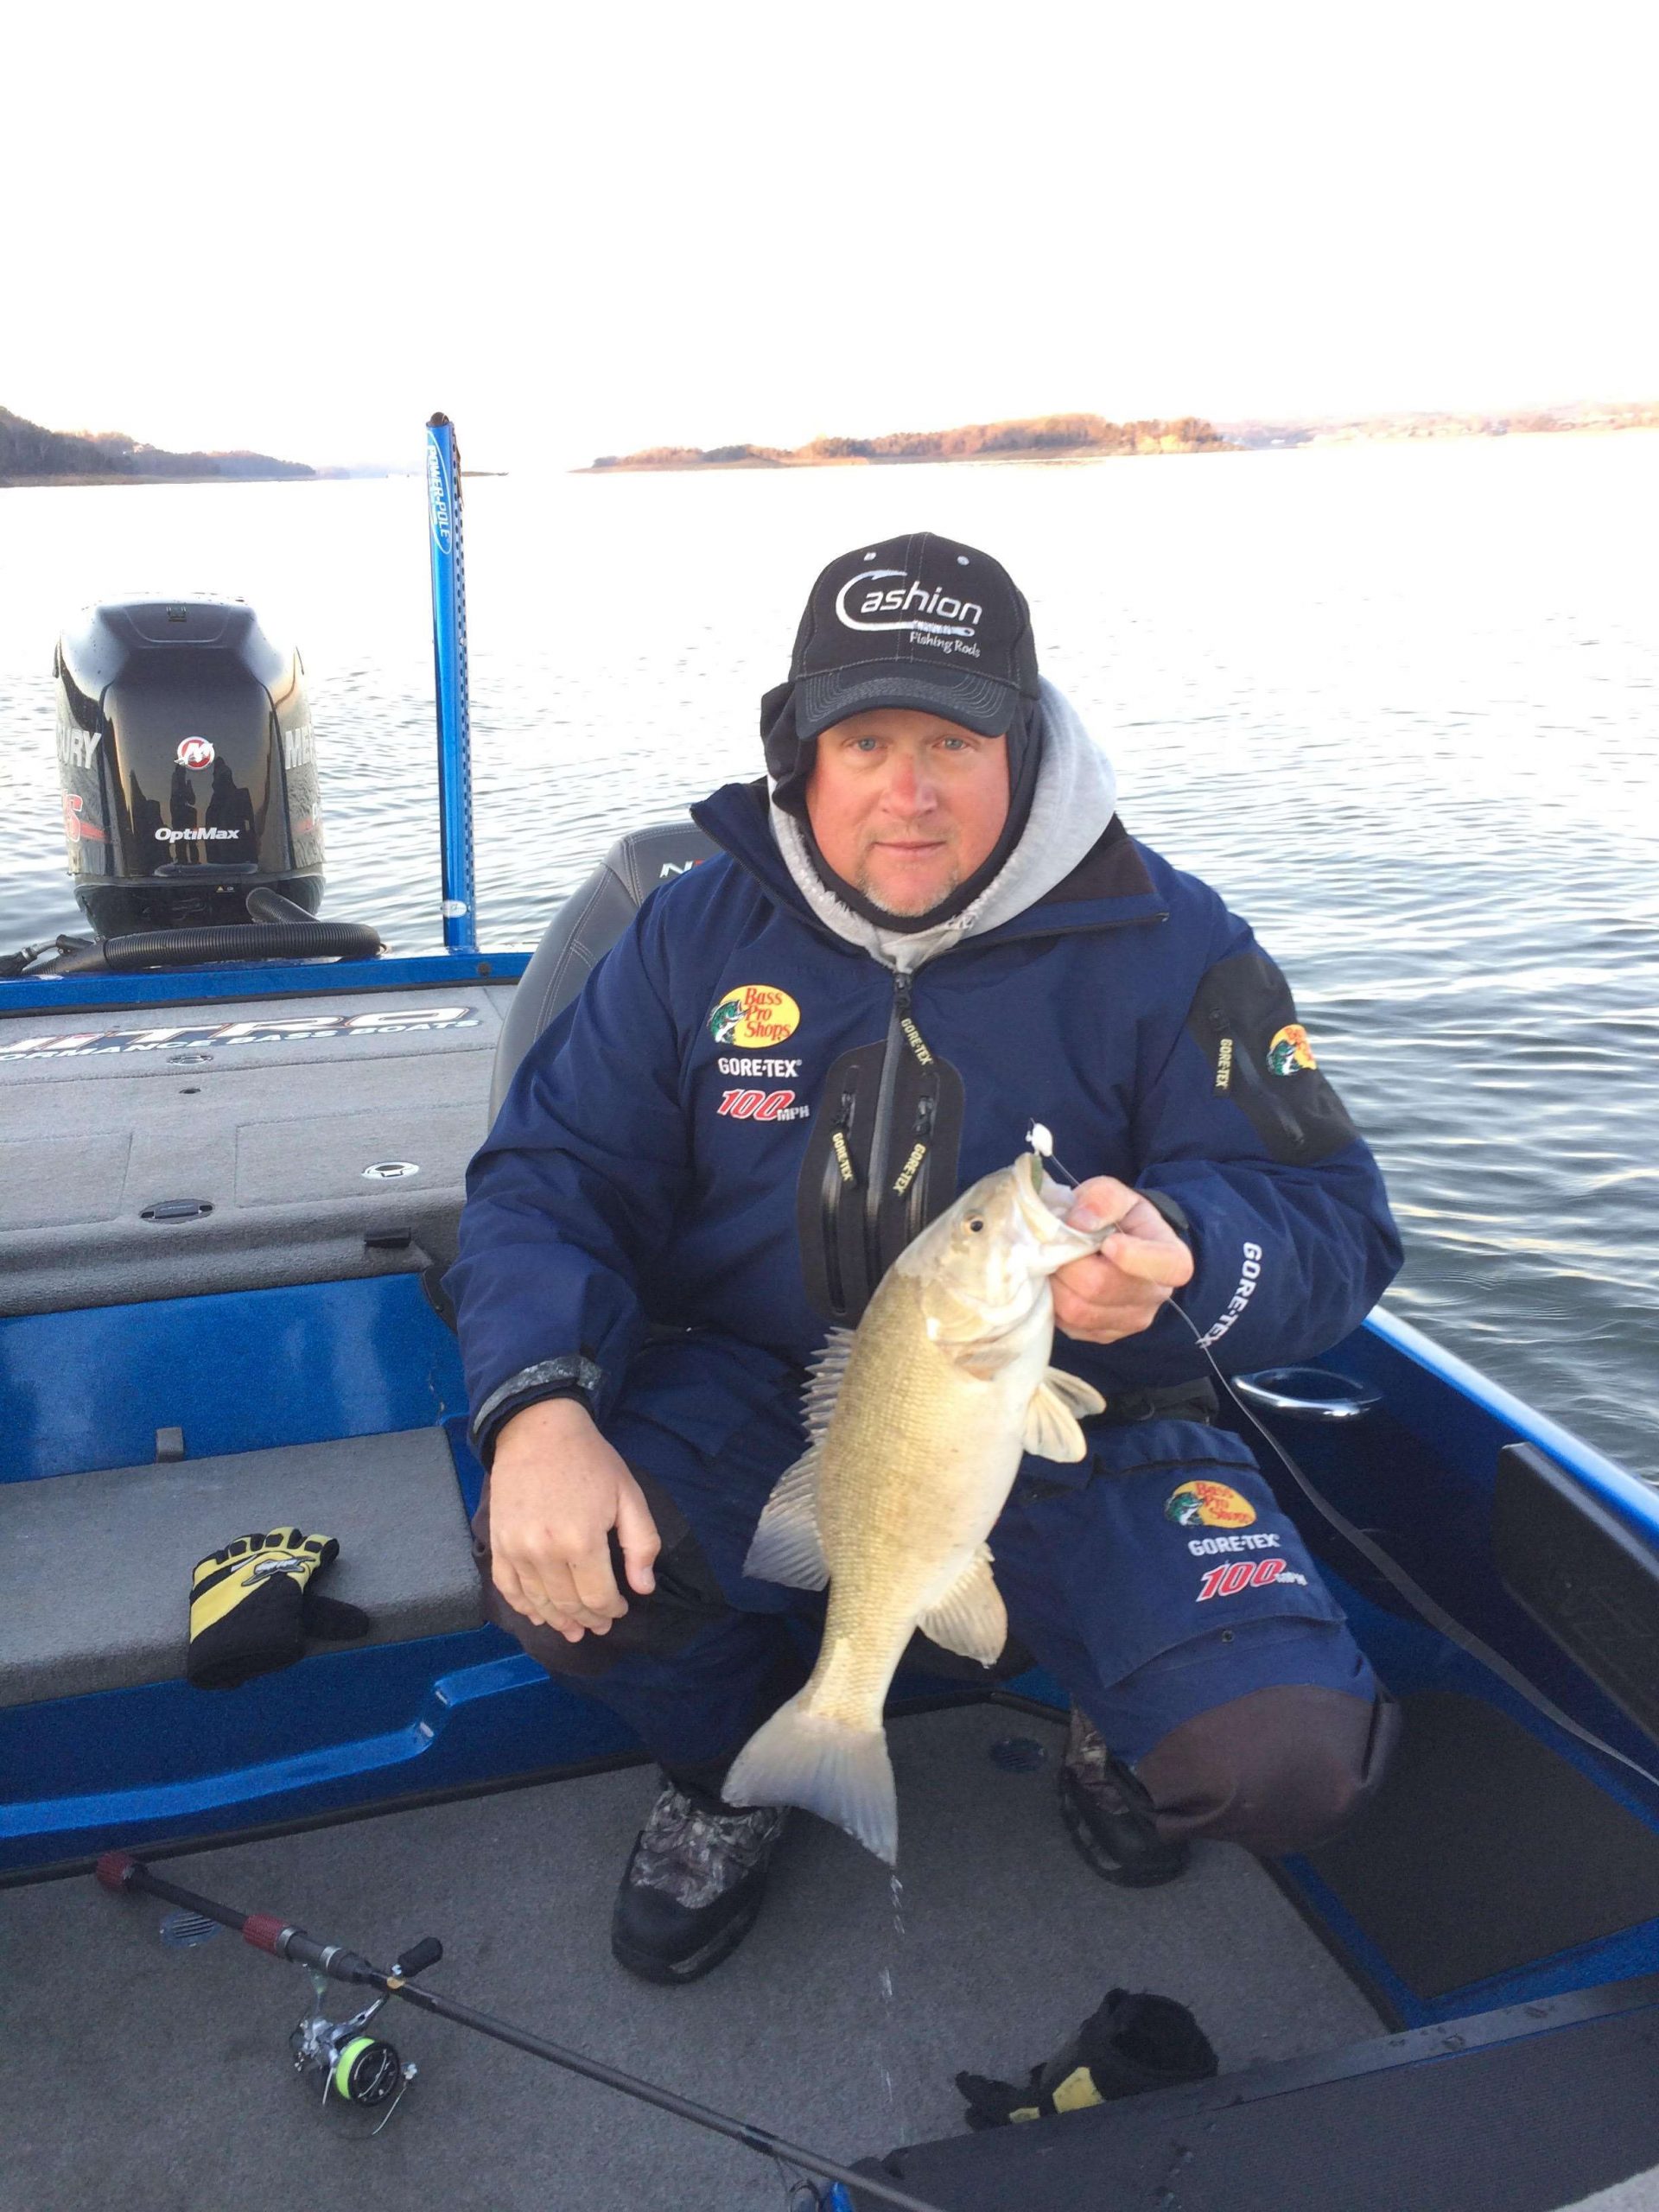 Jamie Hartman is off to a quick start with a solid smallmouth.